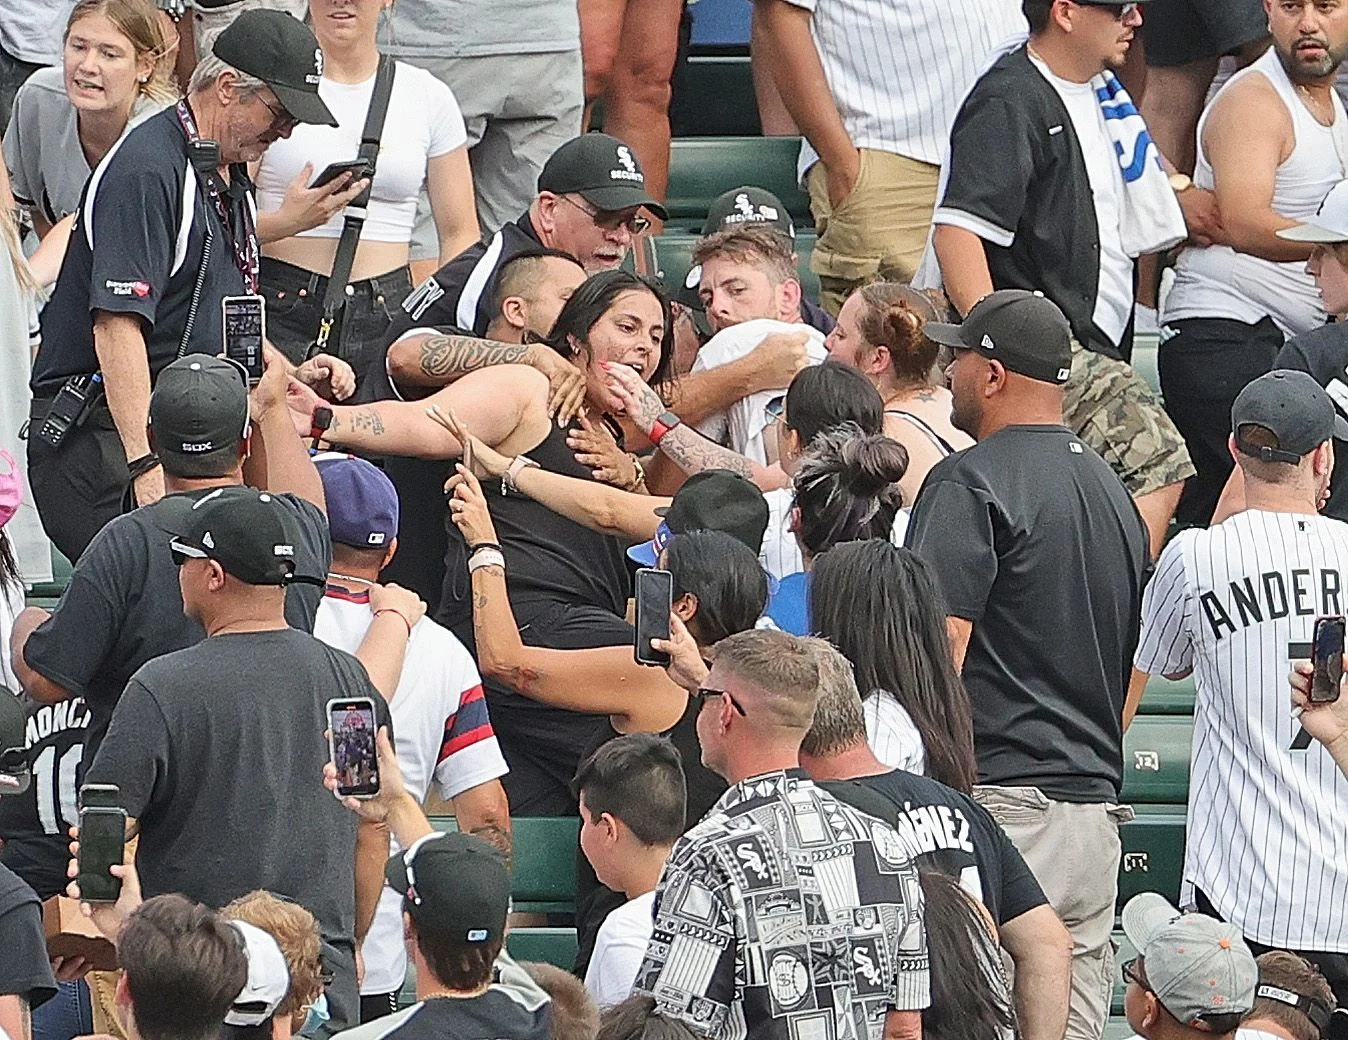 Massive Fan Fight Erupts at White Sox Game